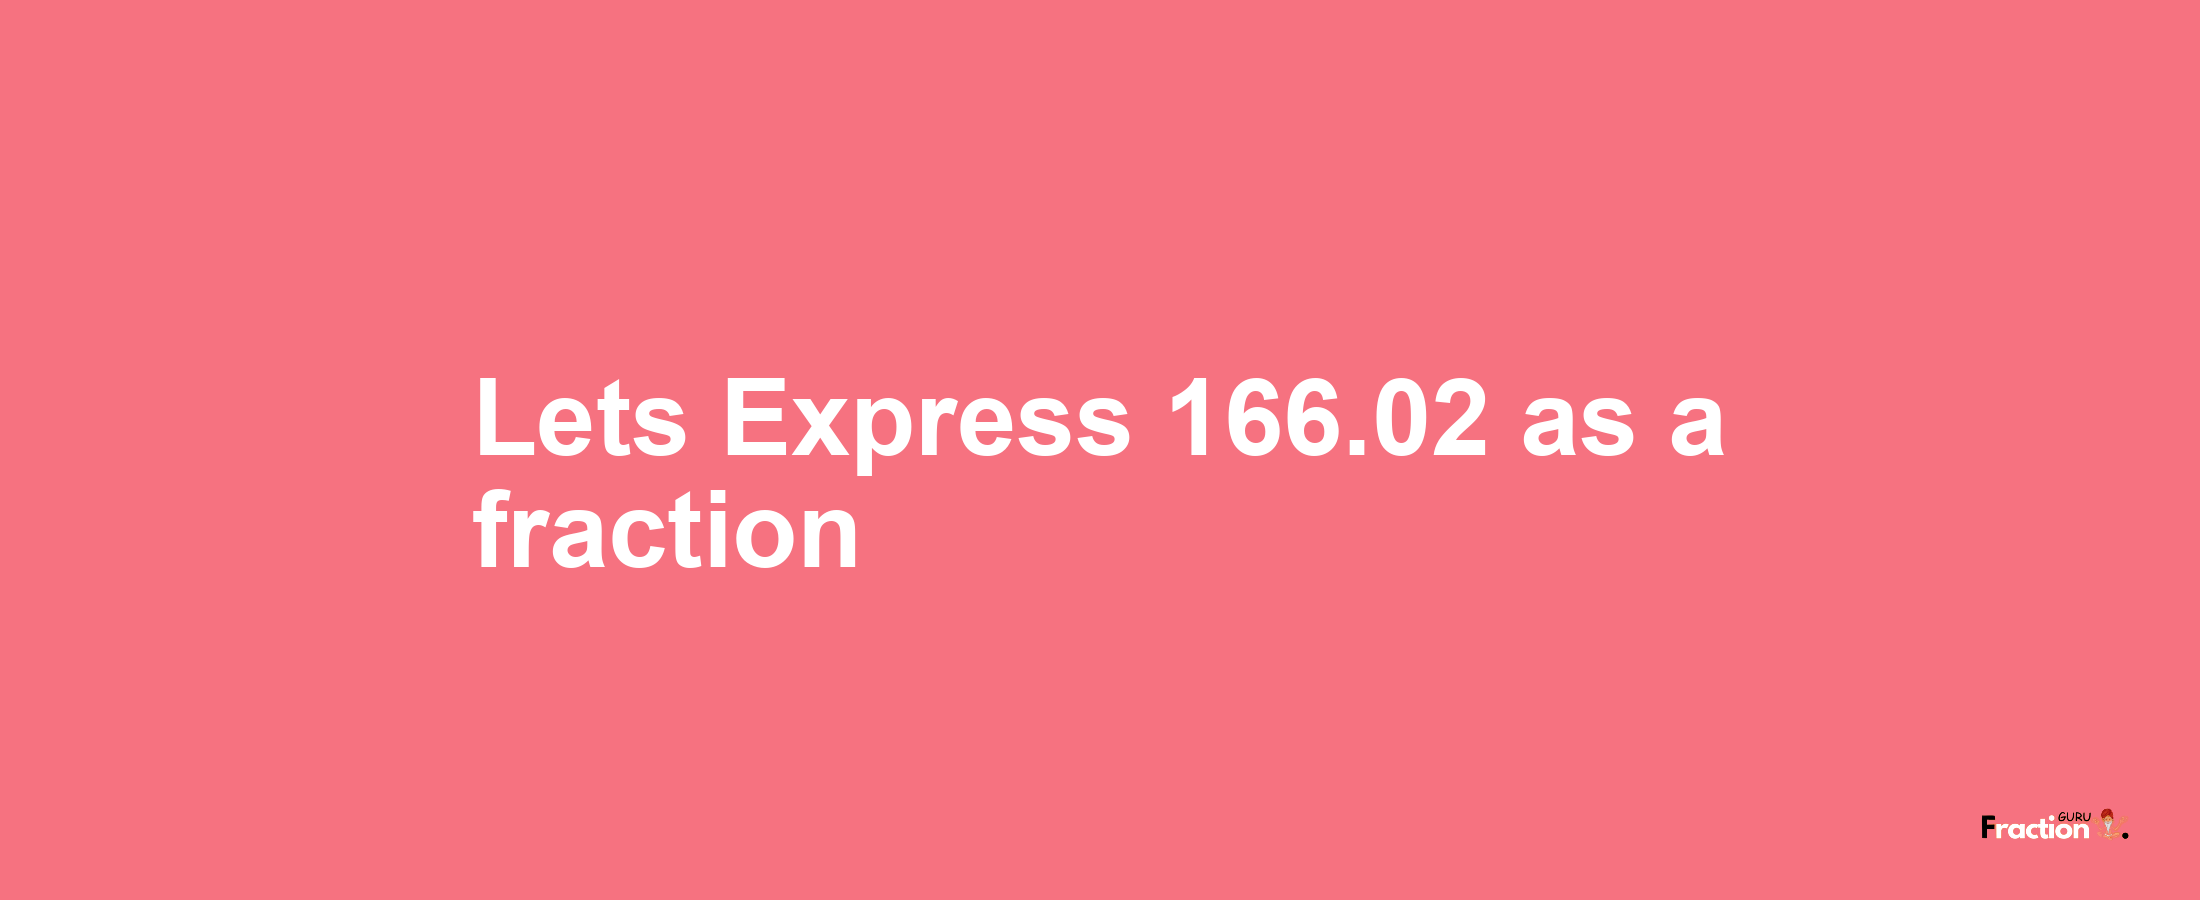 Lets Express 166.02 as afraction